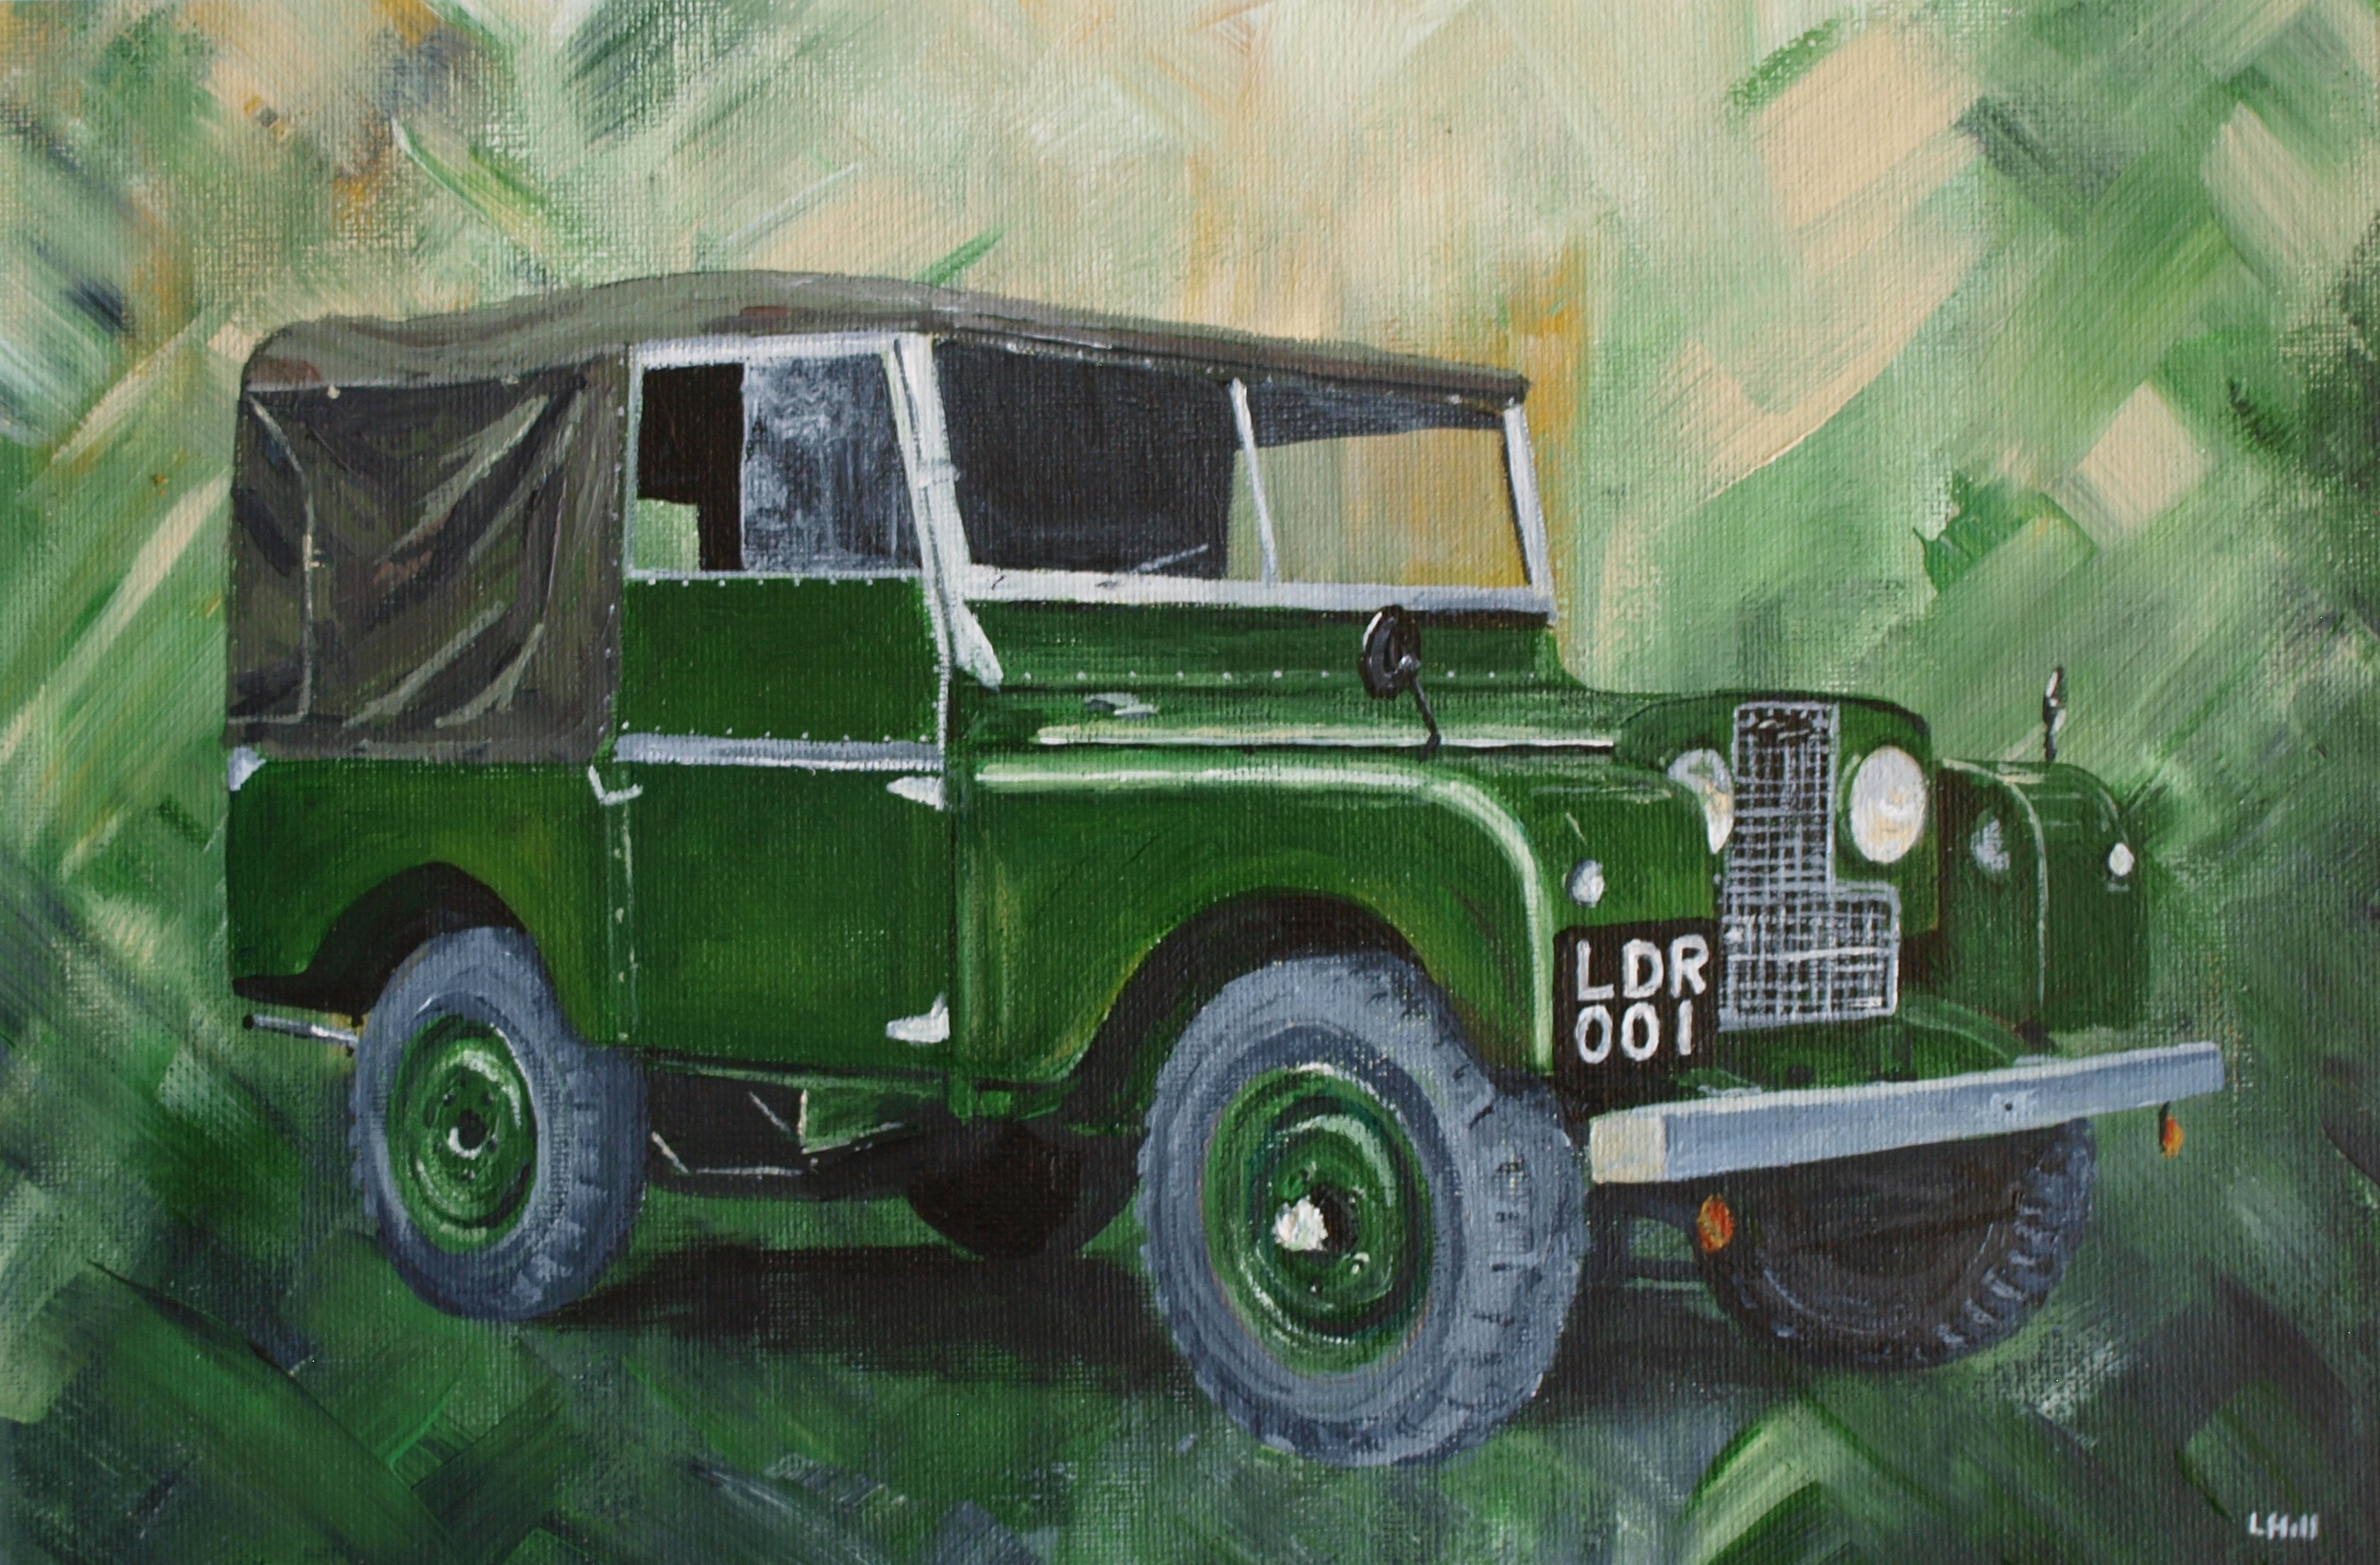 Land Rover Series 1 acrylic painting by Louisa Hill